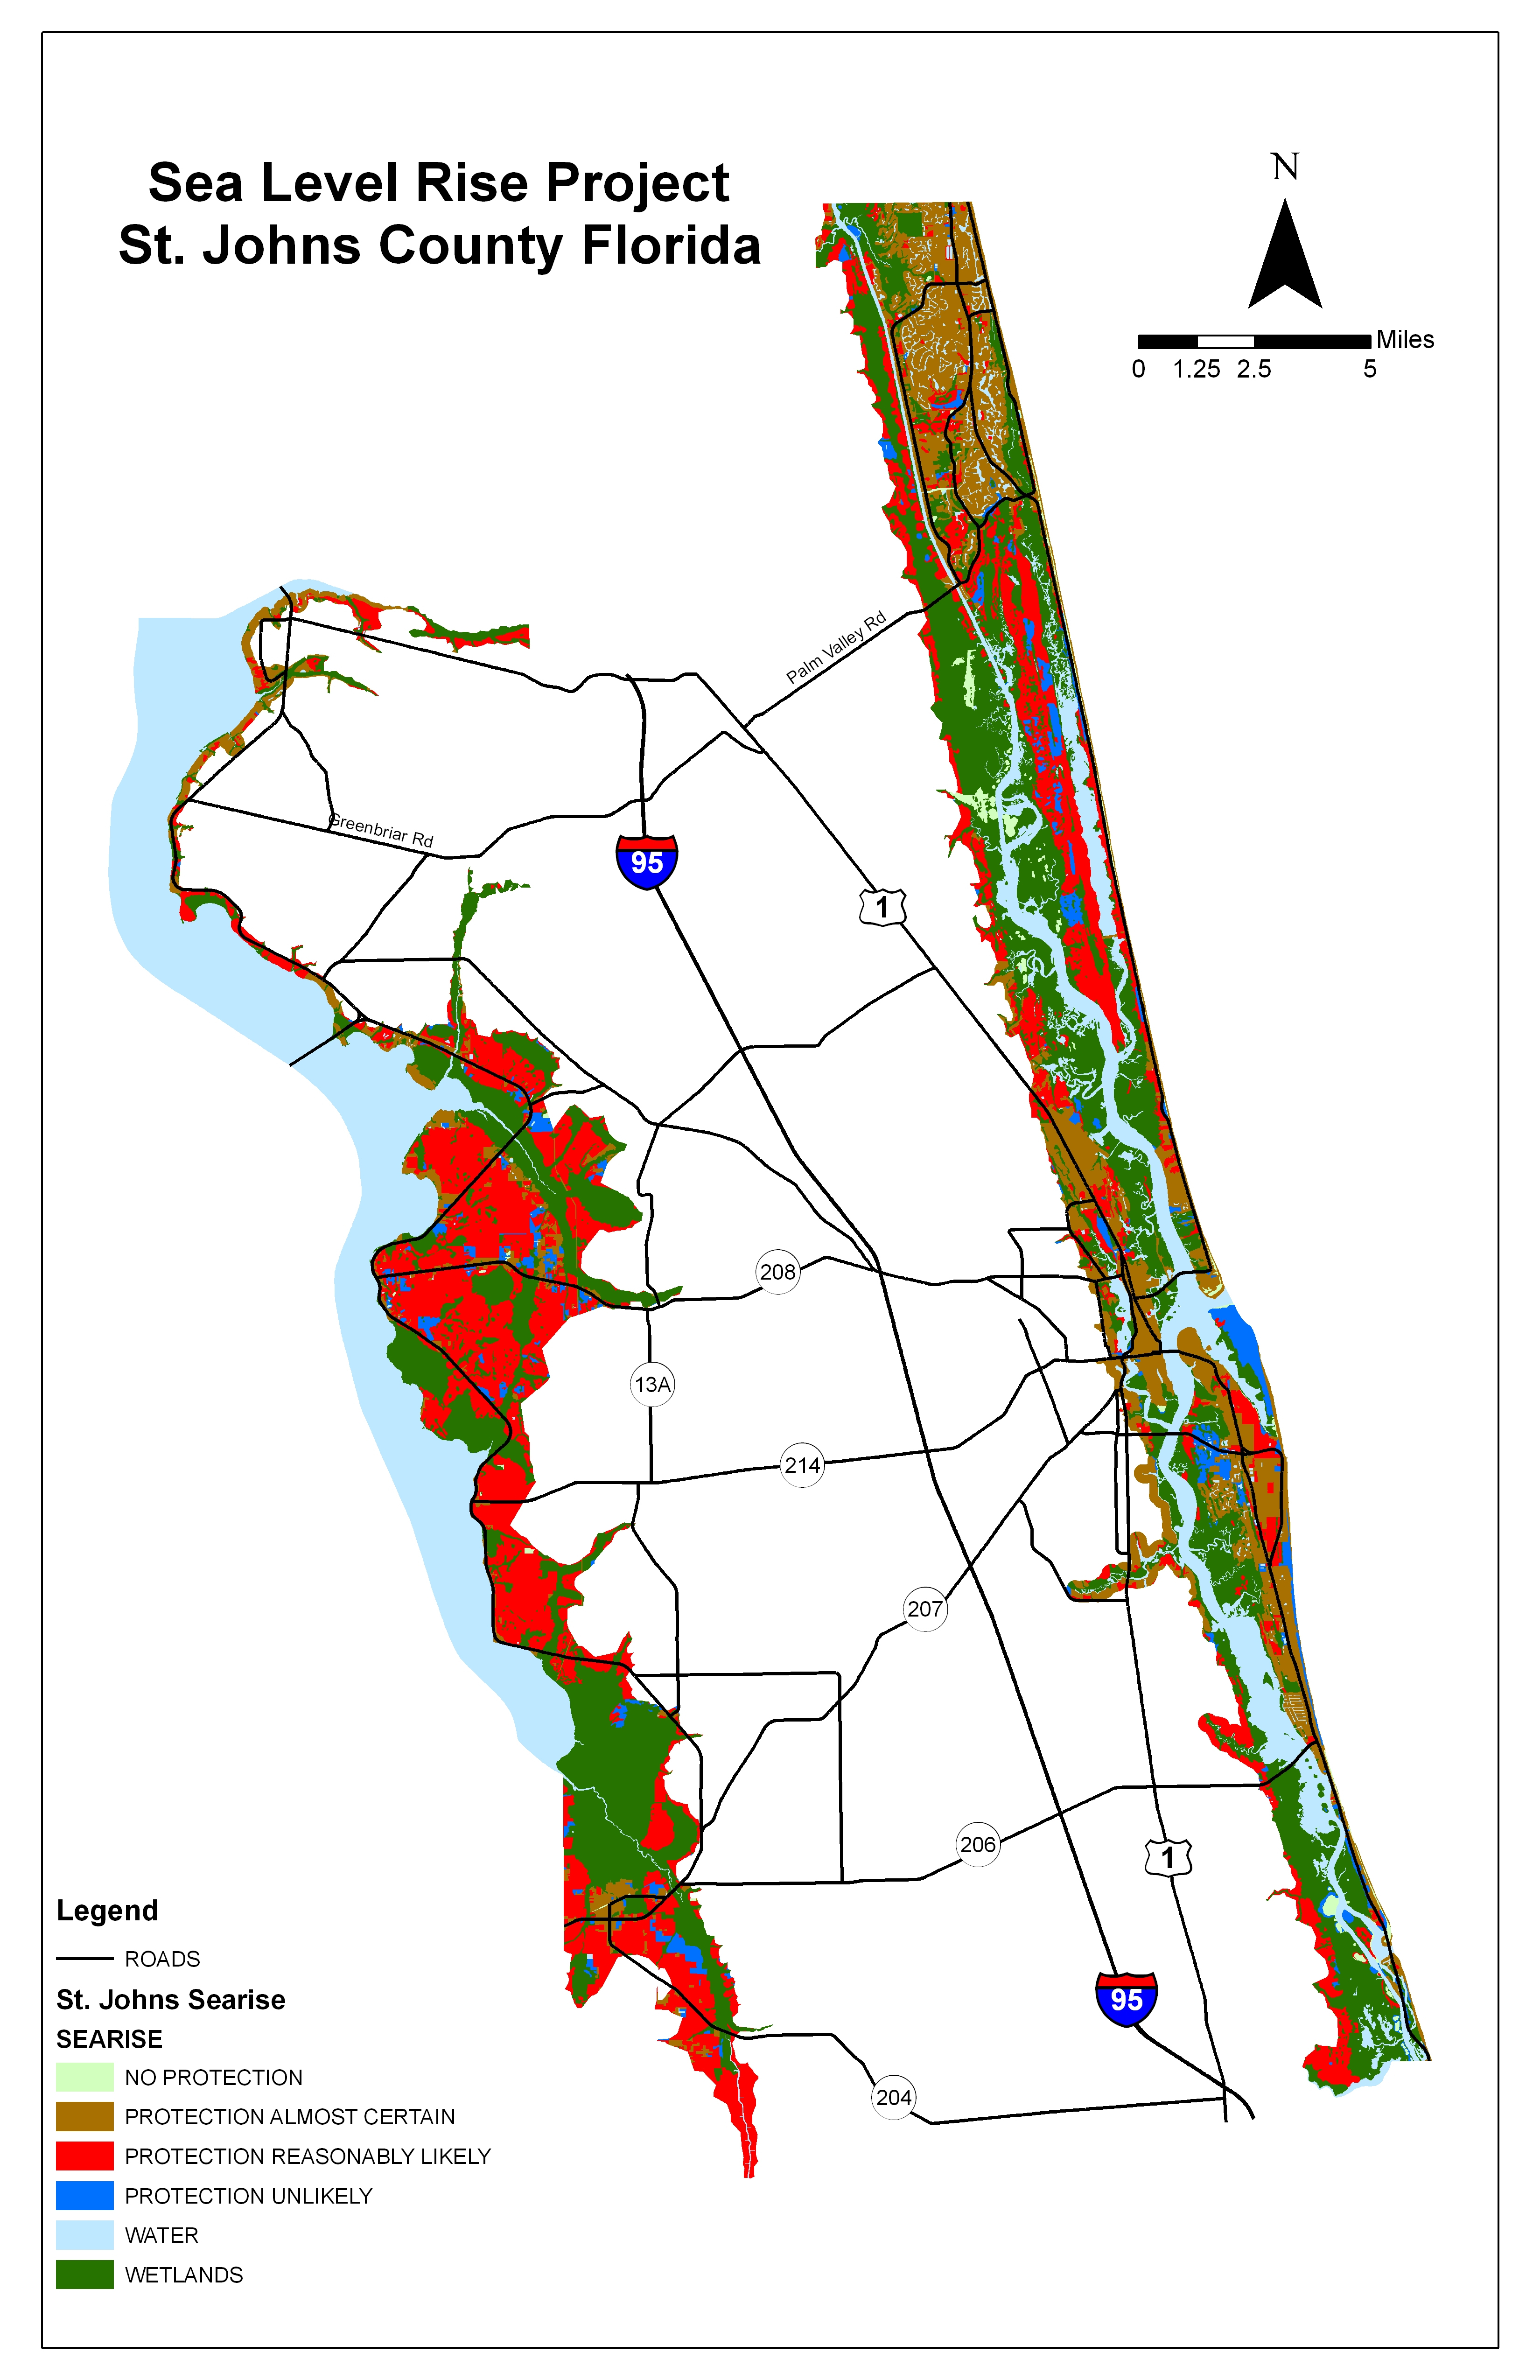 Sea Level Rise Planning Maps: Likelihood Of Shore Protection In Florida - Map Of St Johns County Florida